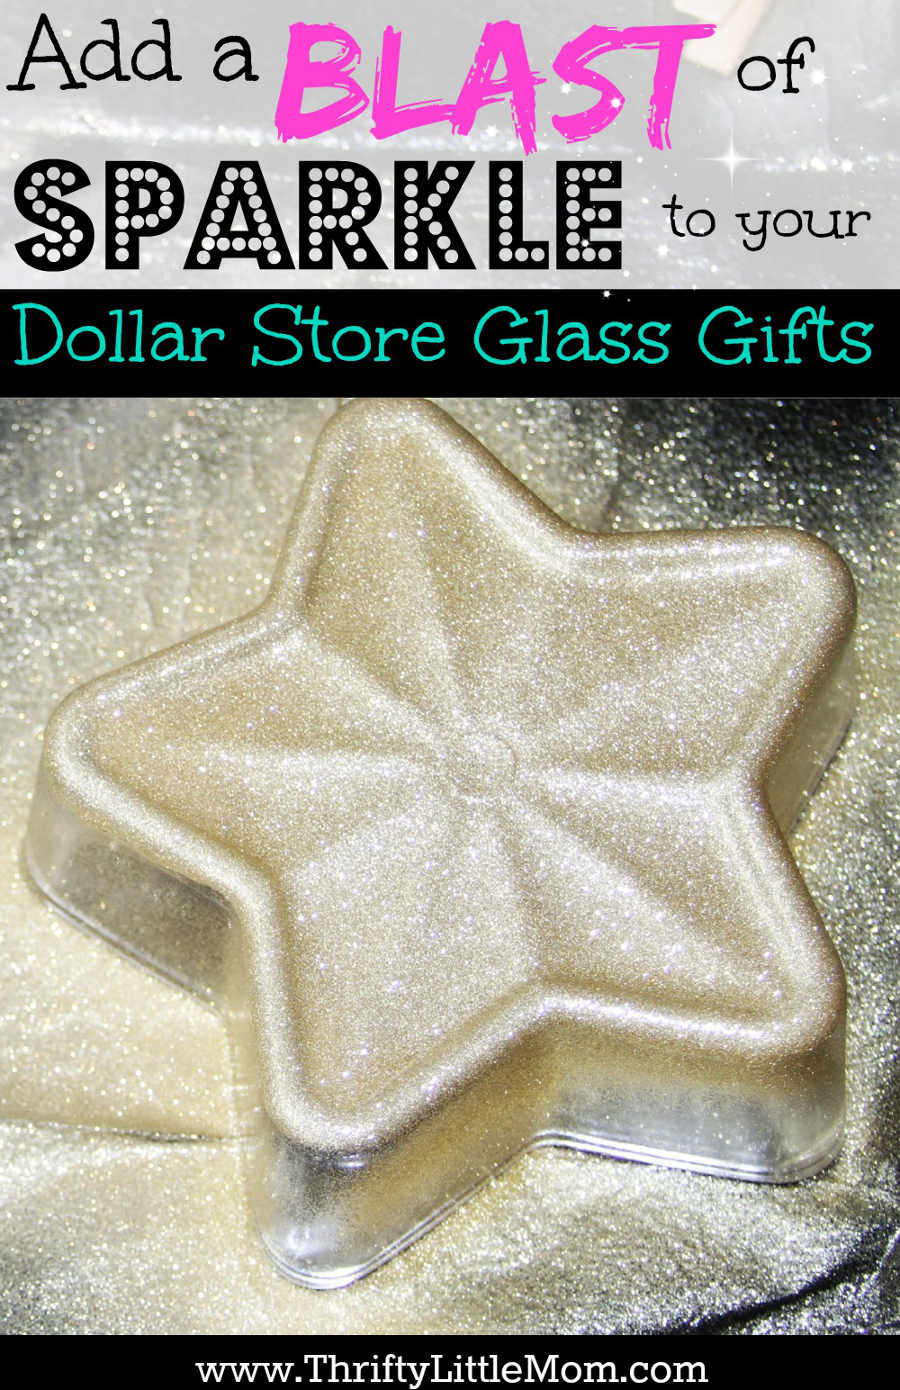 Add a Blast of Holiday Sparkle to Your Dollar Store Gifts! It's really simple and thrifty to kick your dollar store glass gifts up a notch with a little sparkle love! Check out this step by step picture tutorial.